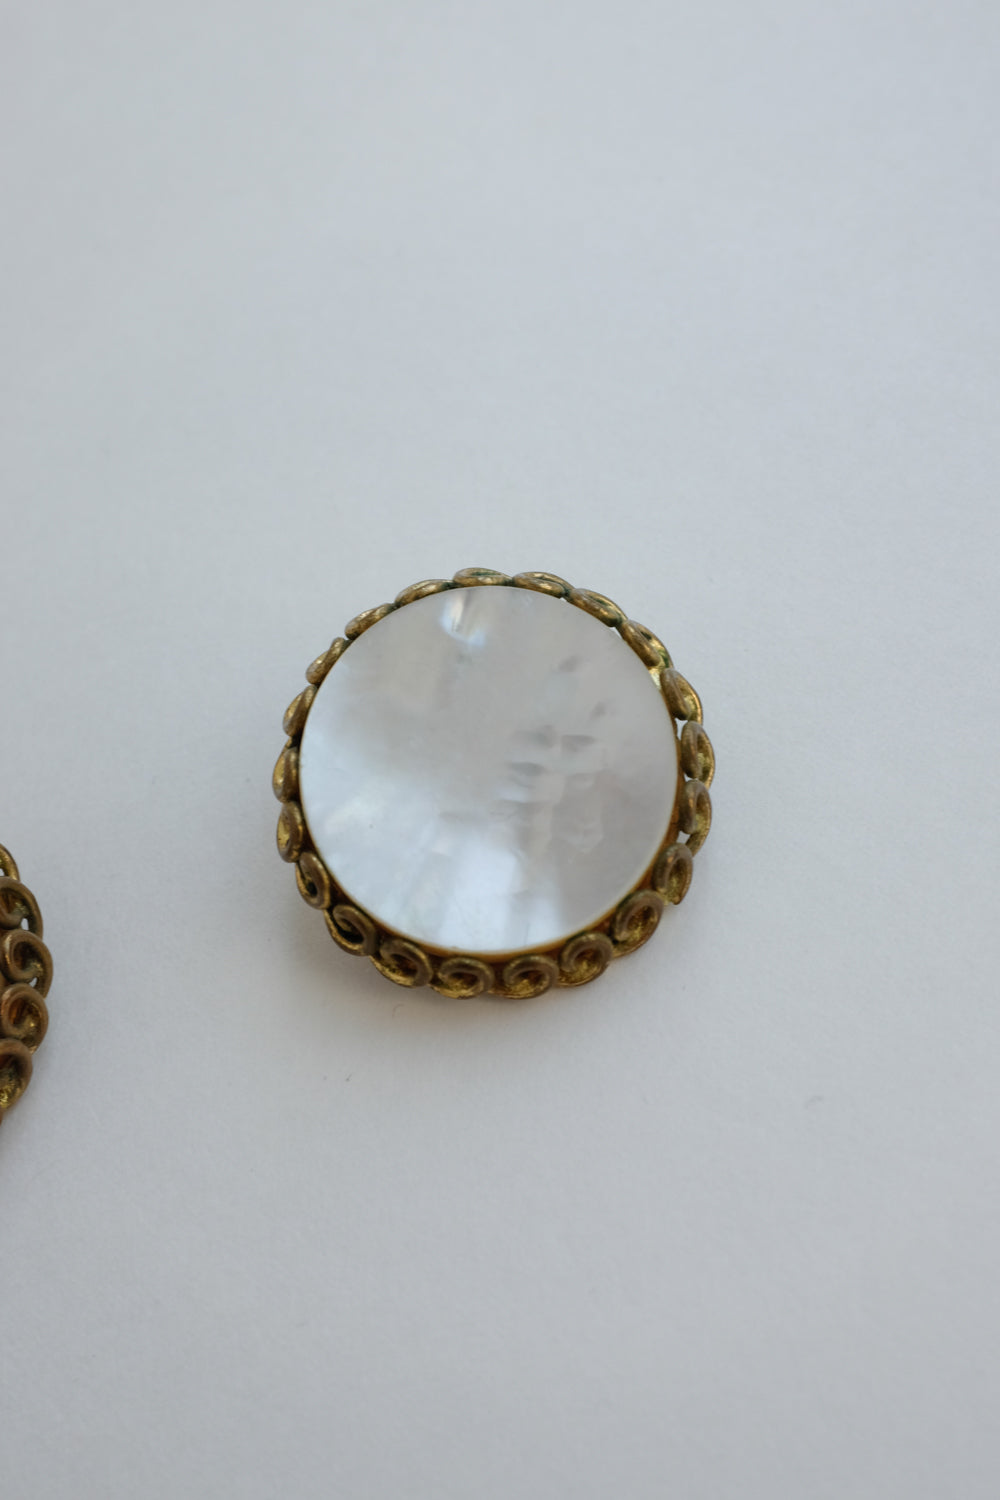 MOTHER OF PEARL VINTAGE GOLD EARRINGS